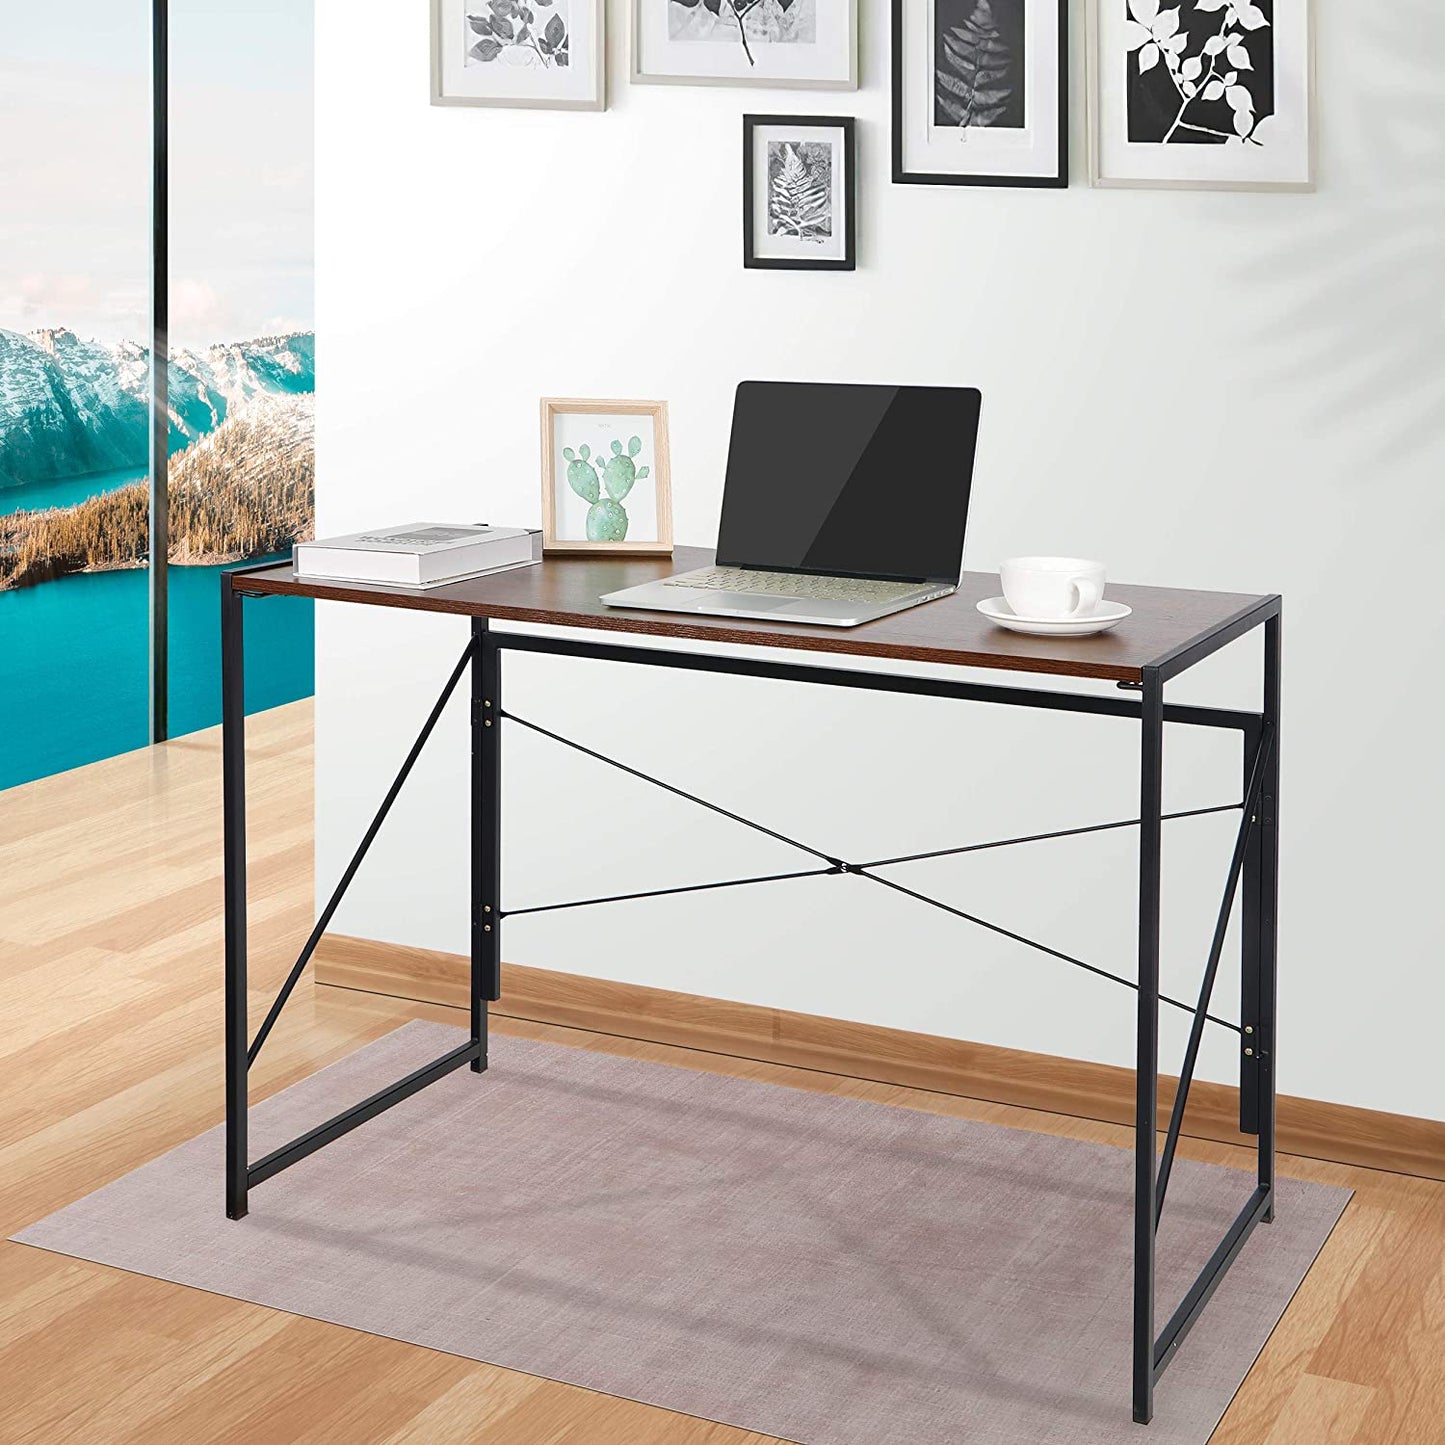 Folding Computer Desk 39'' Sturdy Writing Desk Gaming Desk Home Office PC Laptop Foldable Table Modern Simple Small Study Desk Steel Frame